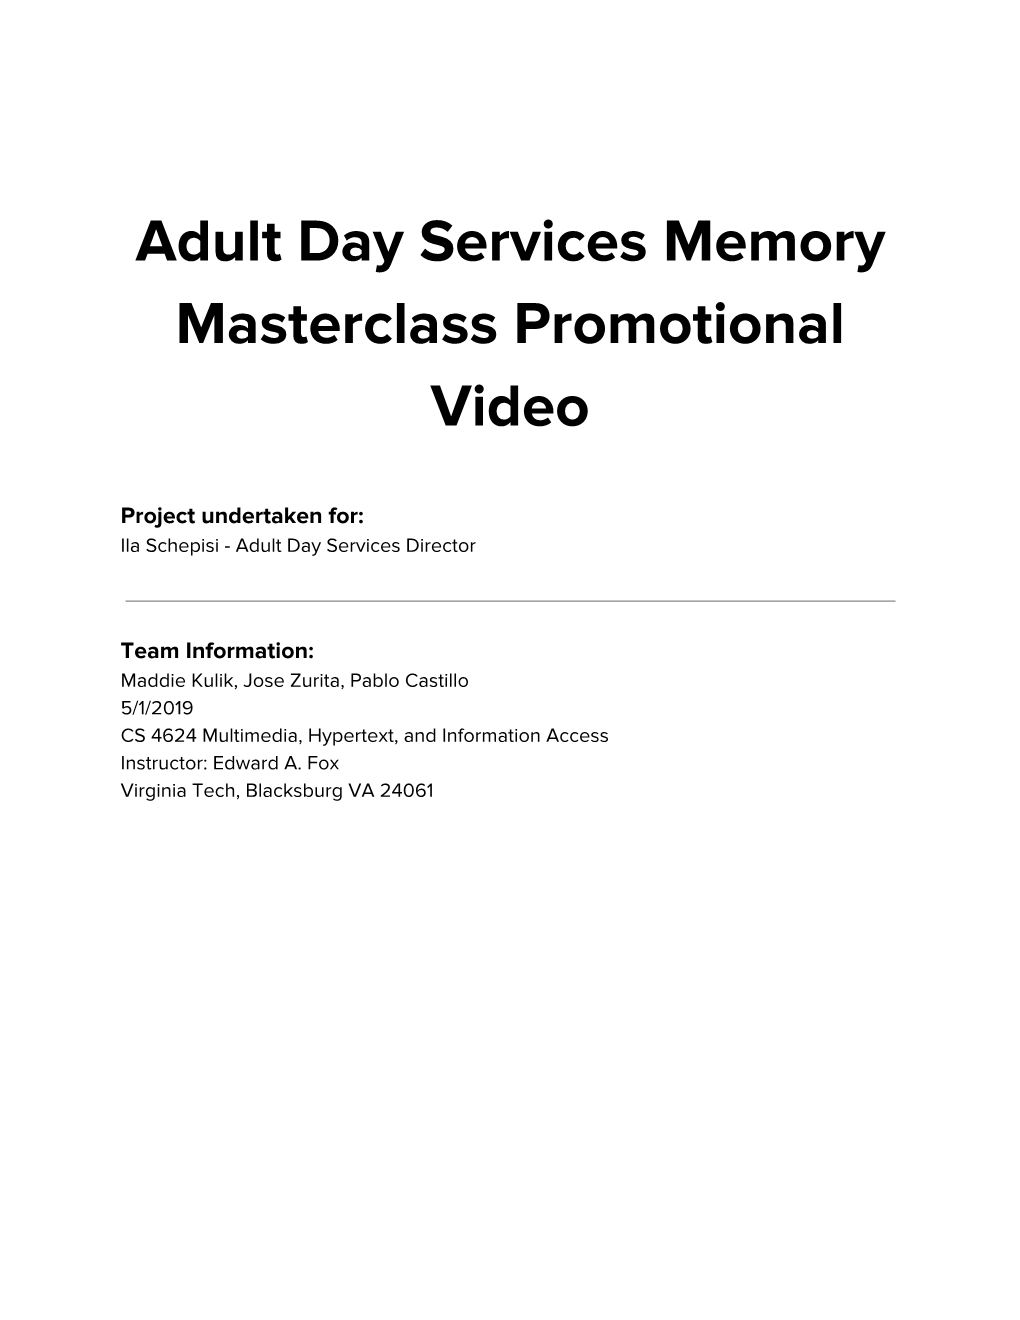 Adult Day Services Memory Masterclass Promotional Video